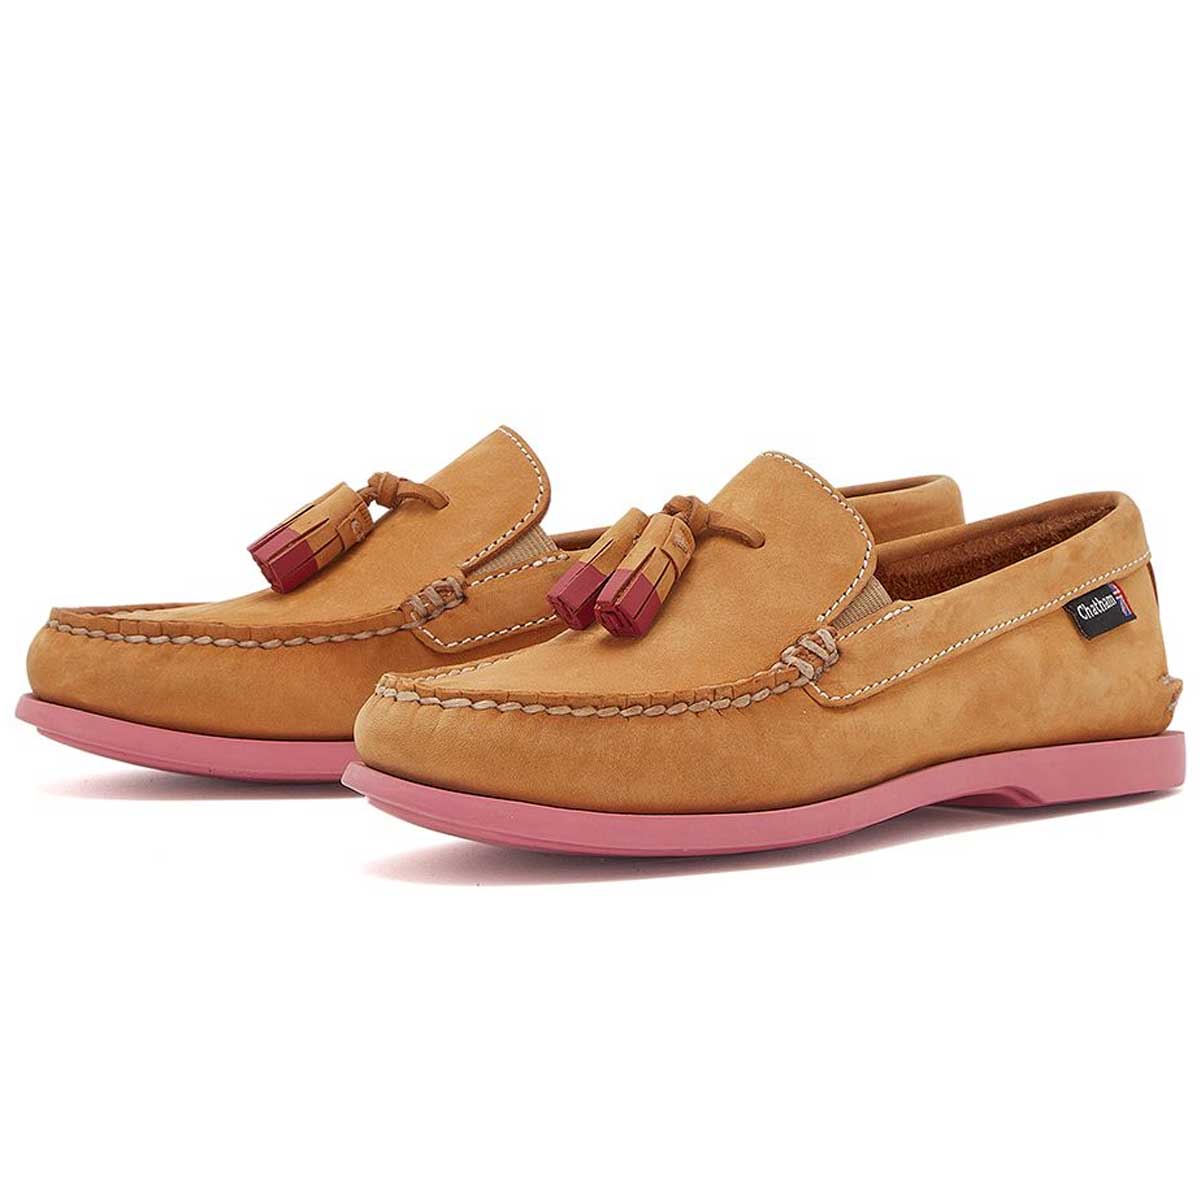 CHATHAM Crete G2 Leather Tassel Loafers - Women's - Tan / Pink